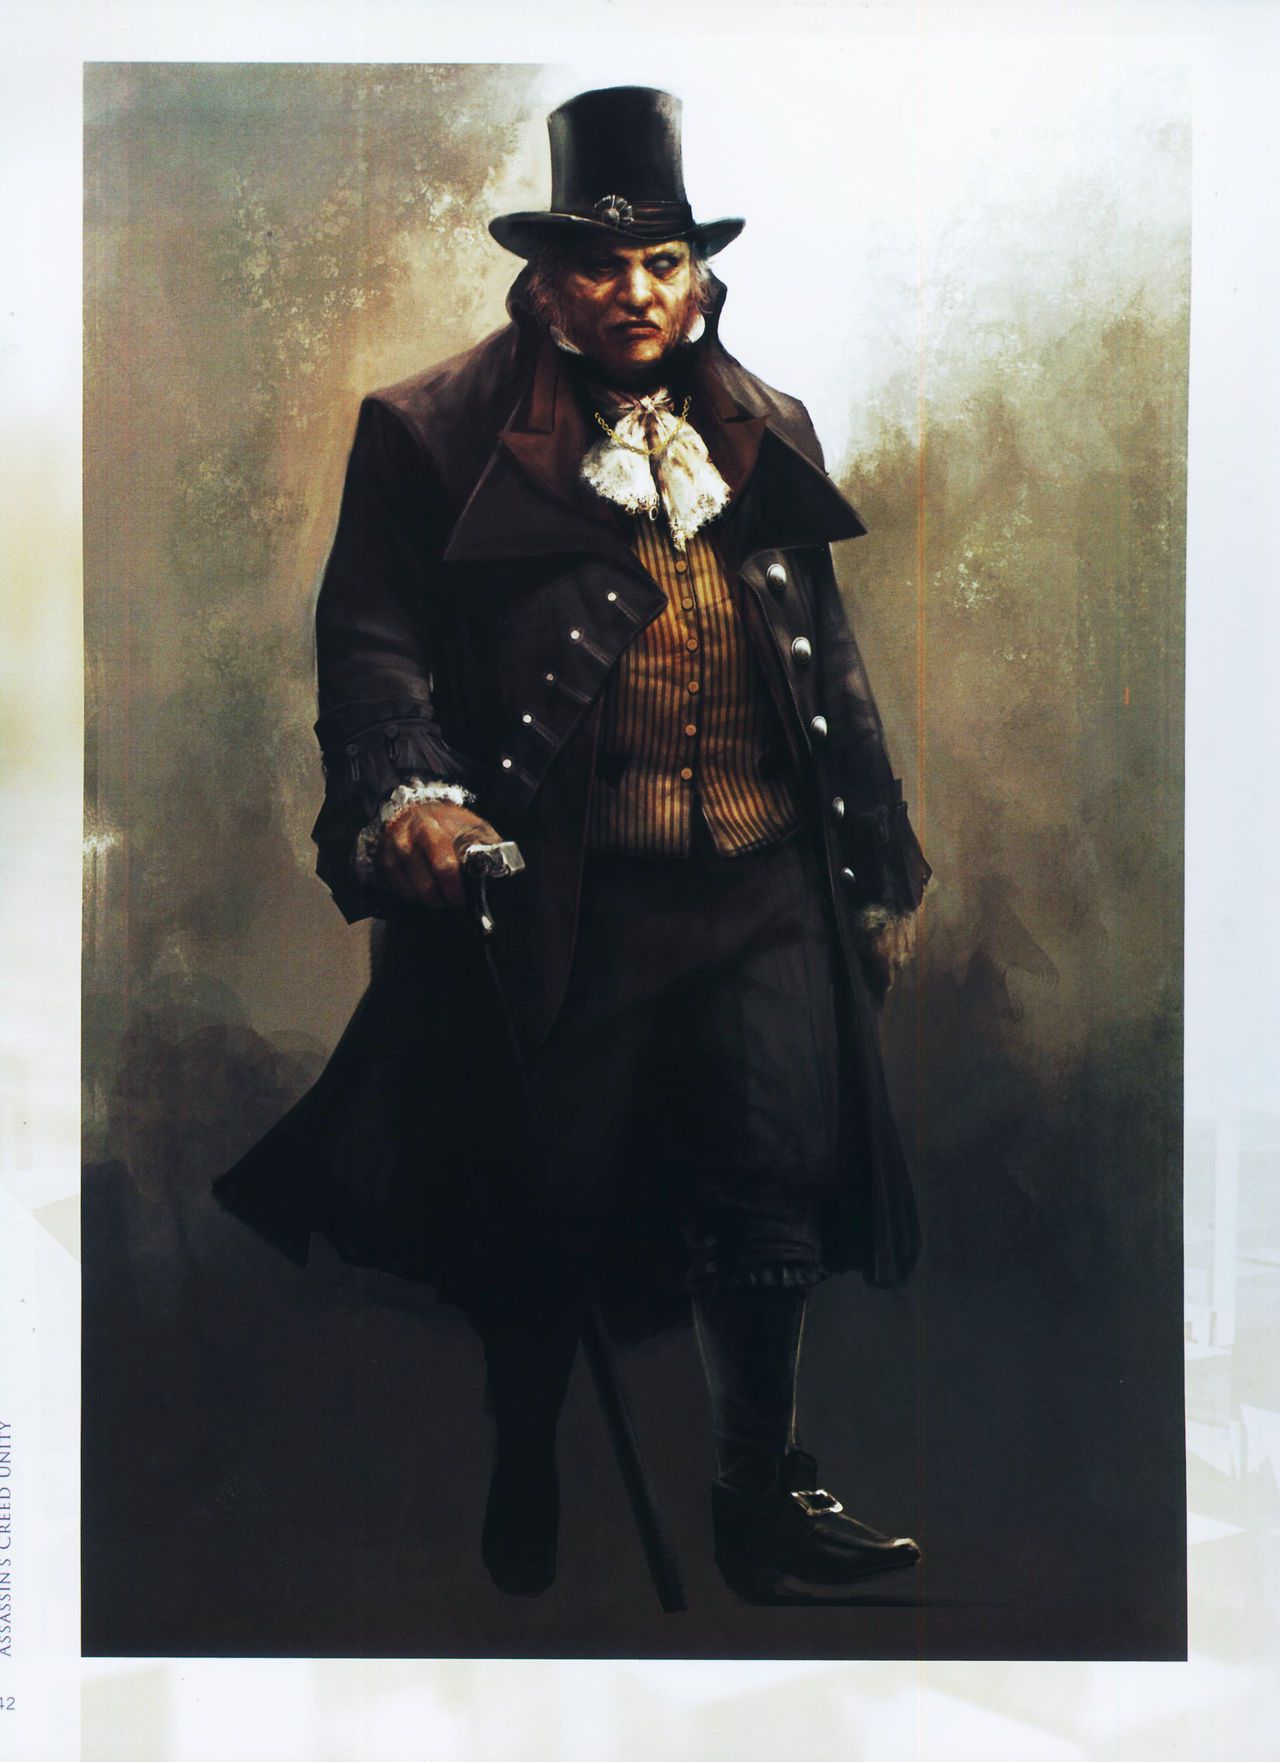 The Art of Assassin's Creed Unity (2014) 44